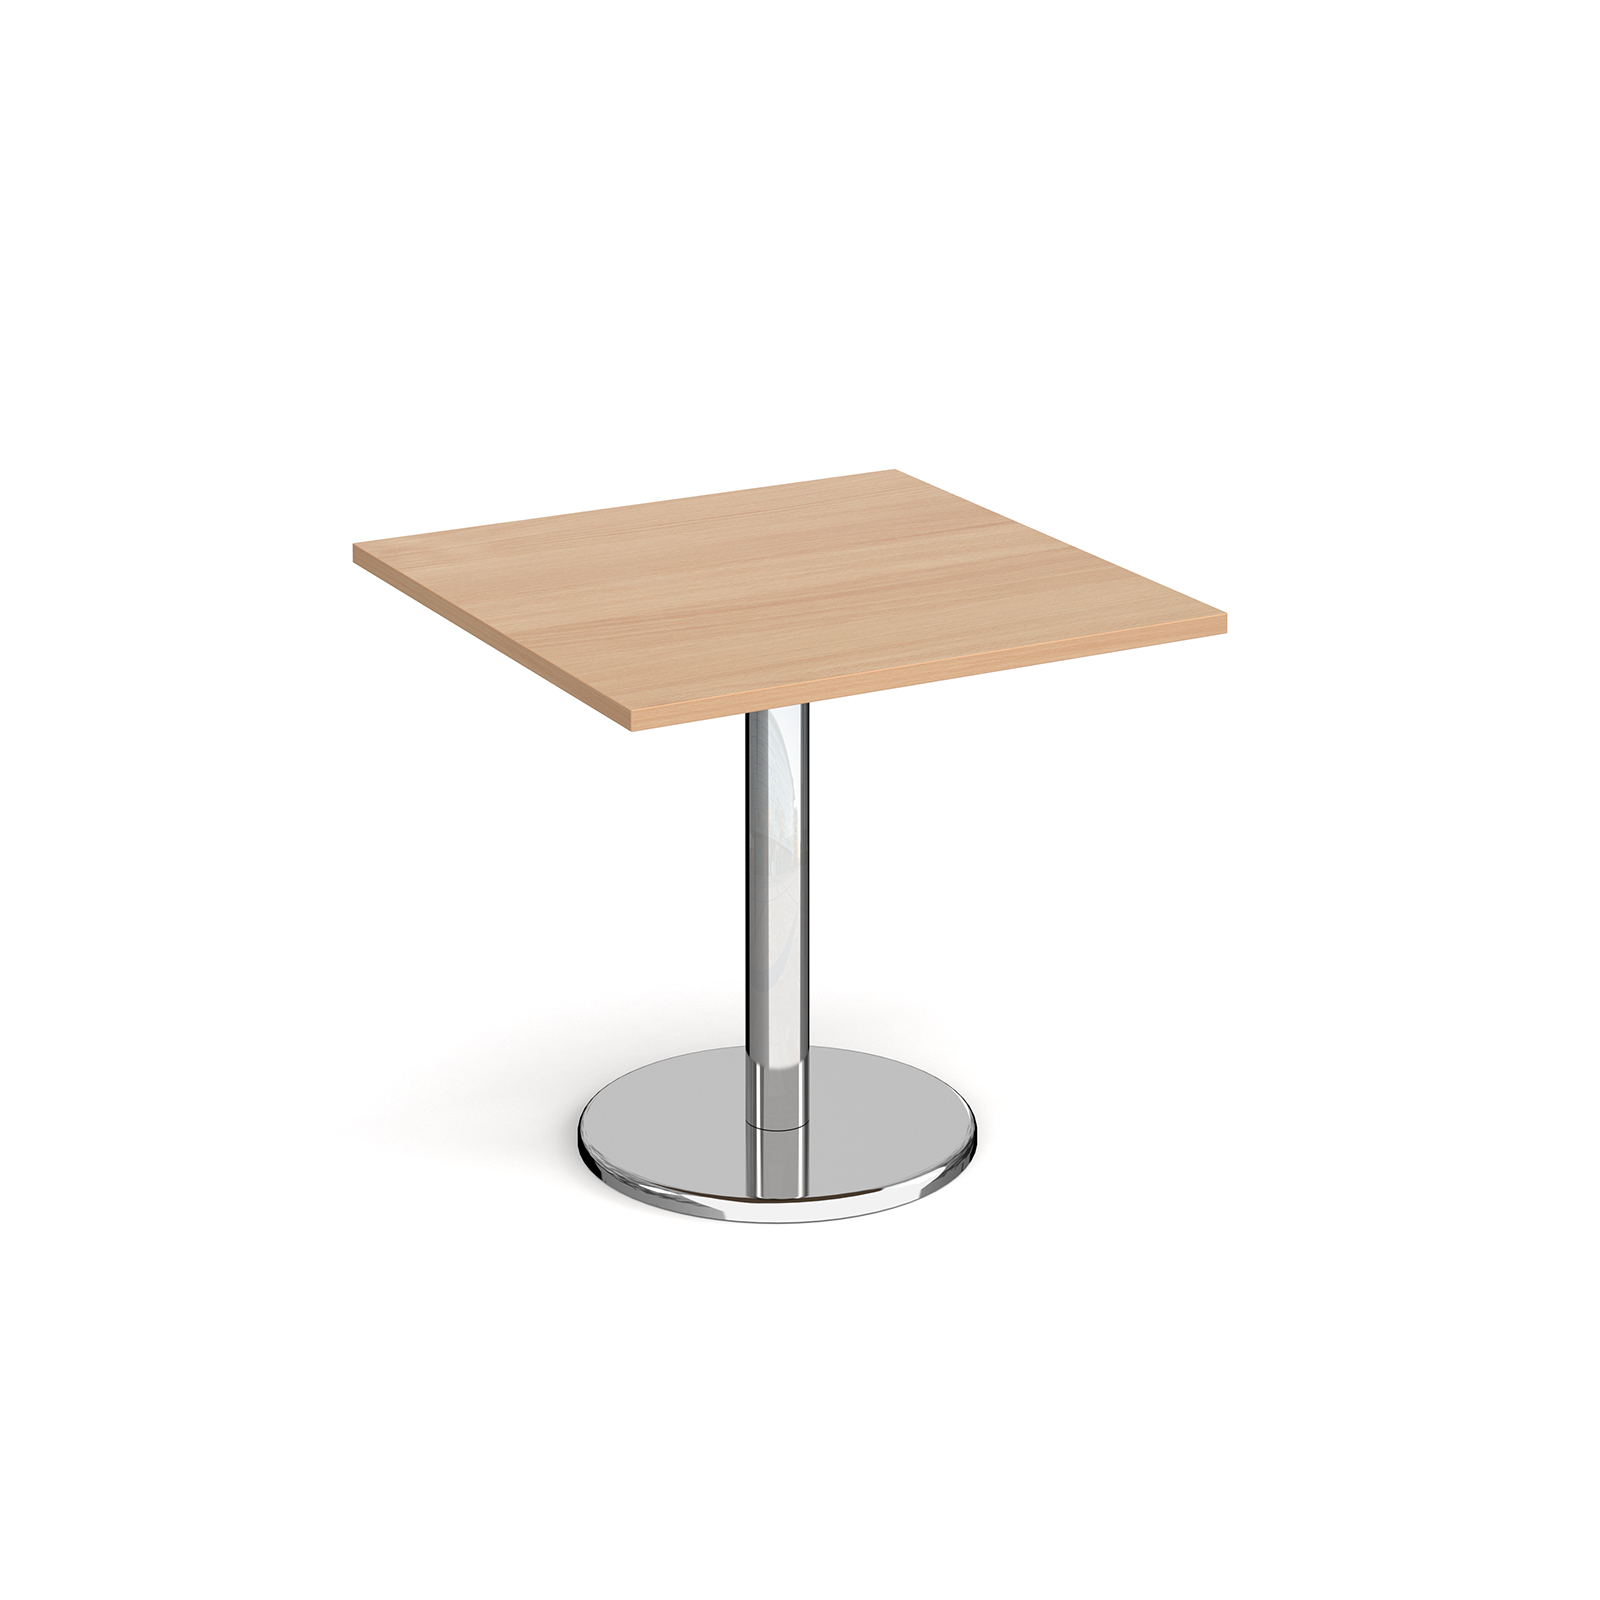 Pisa square dining table with round chrome base 800mm - beech